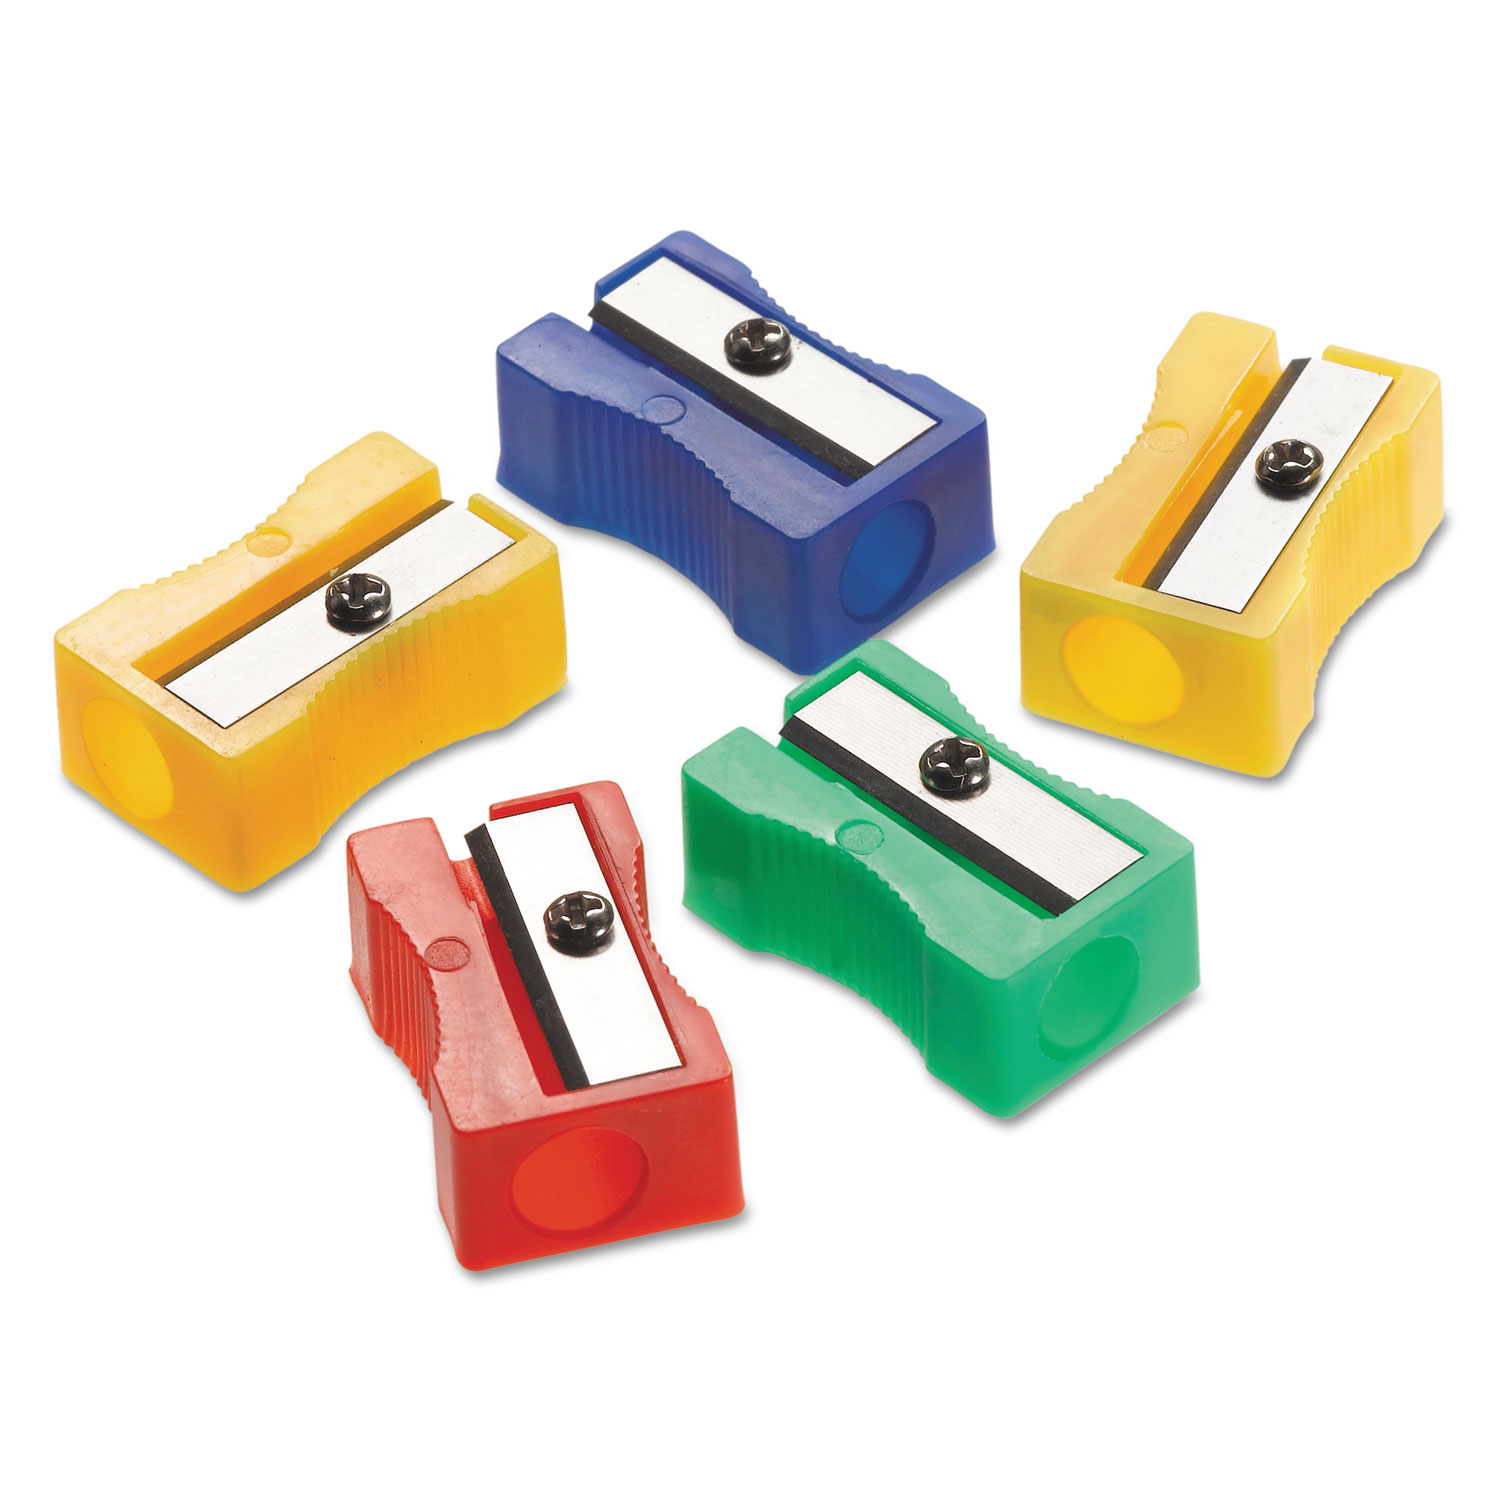 Sargent Art 3 Manual Hole Pencil Sharpeners - 3 Holes With Lid